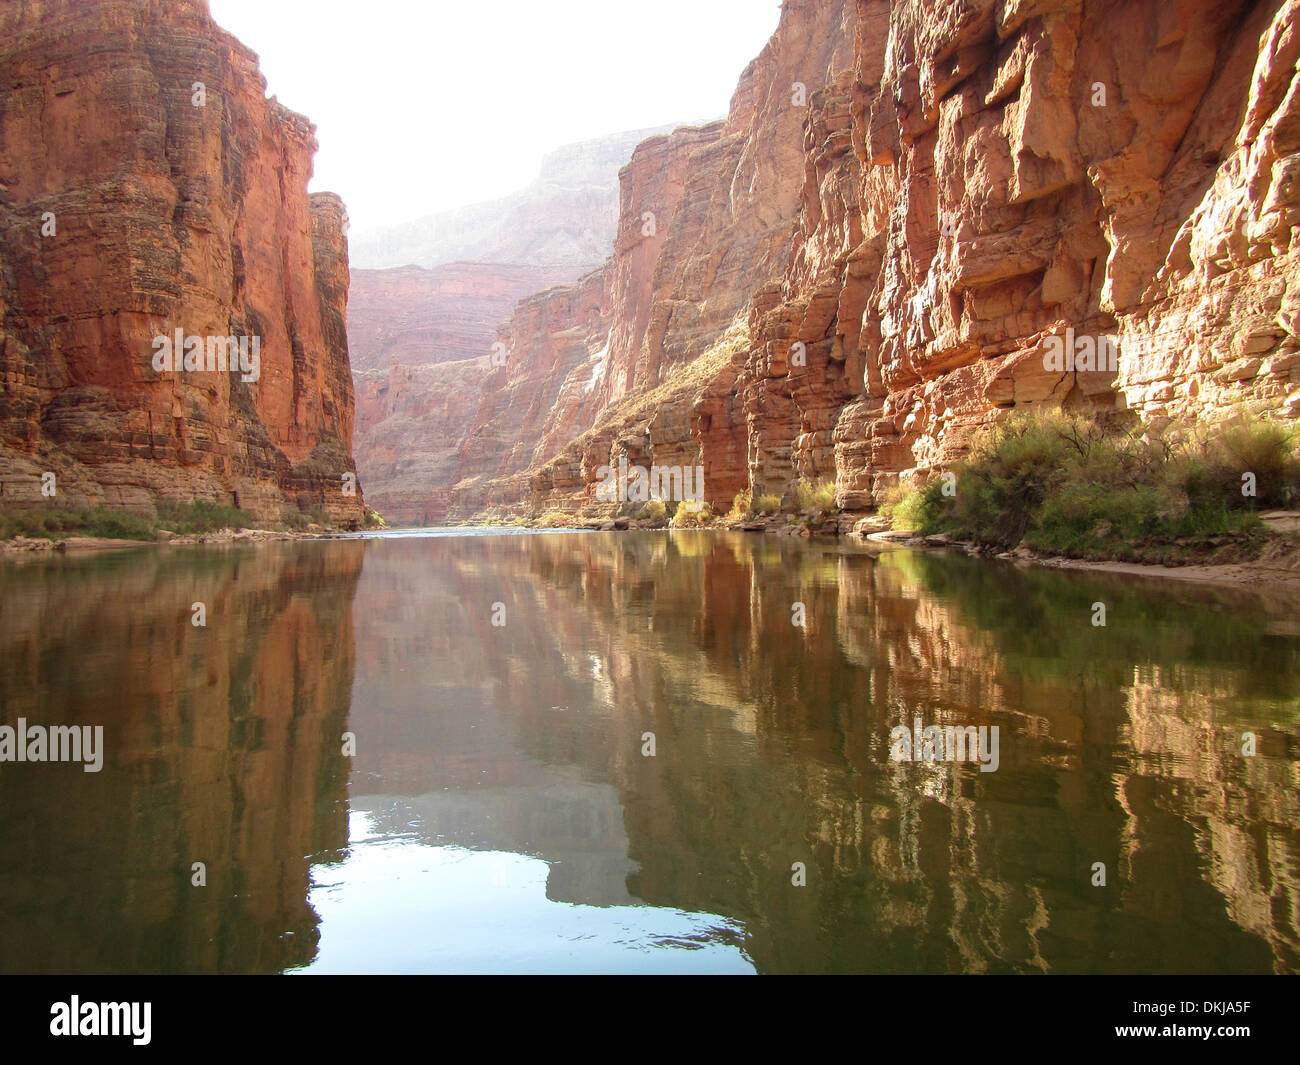 Calm Water in the Redwall section of the Grand Canyon Stock Photo